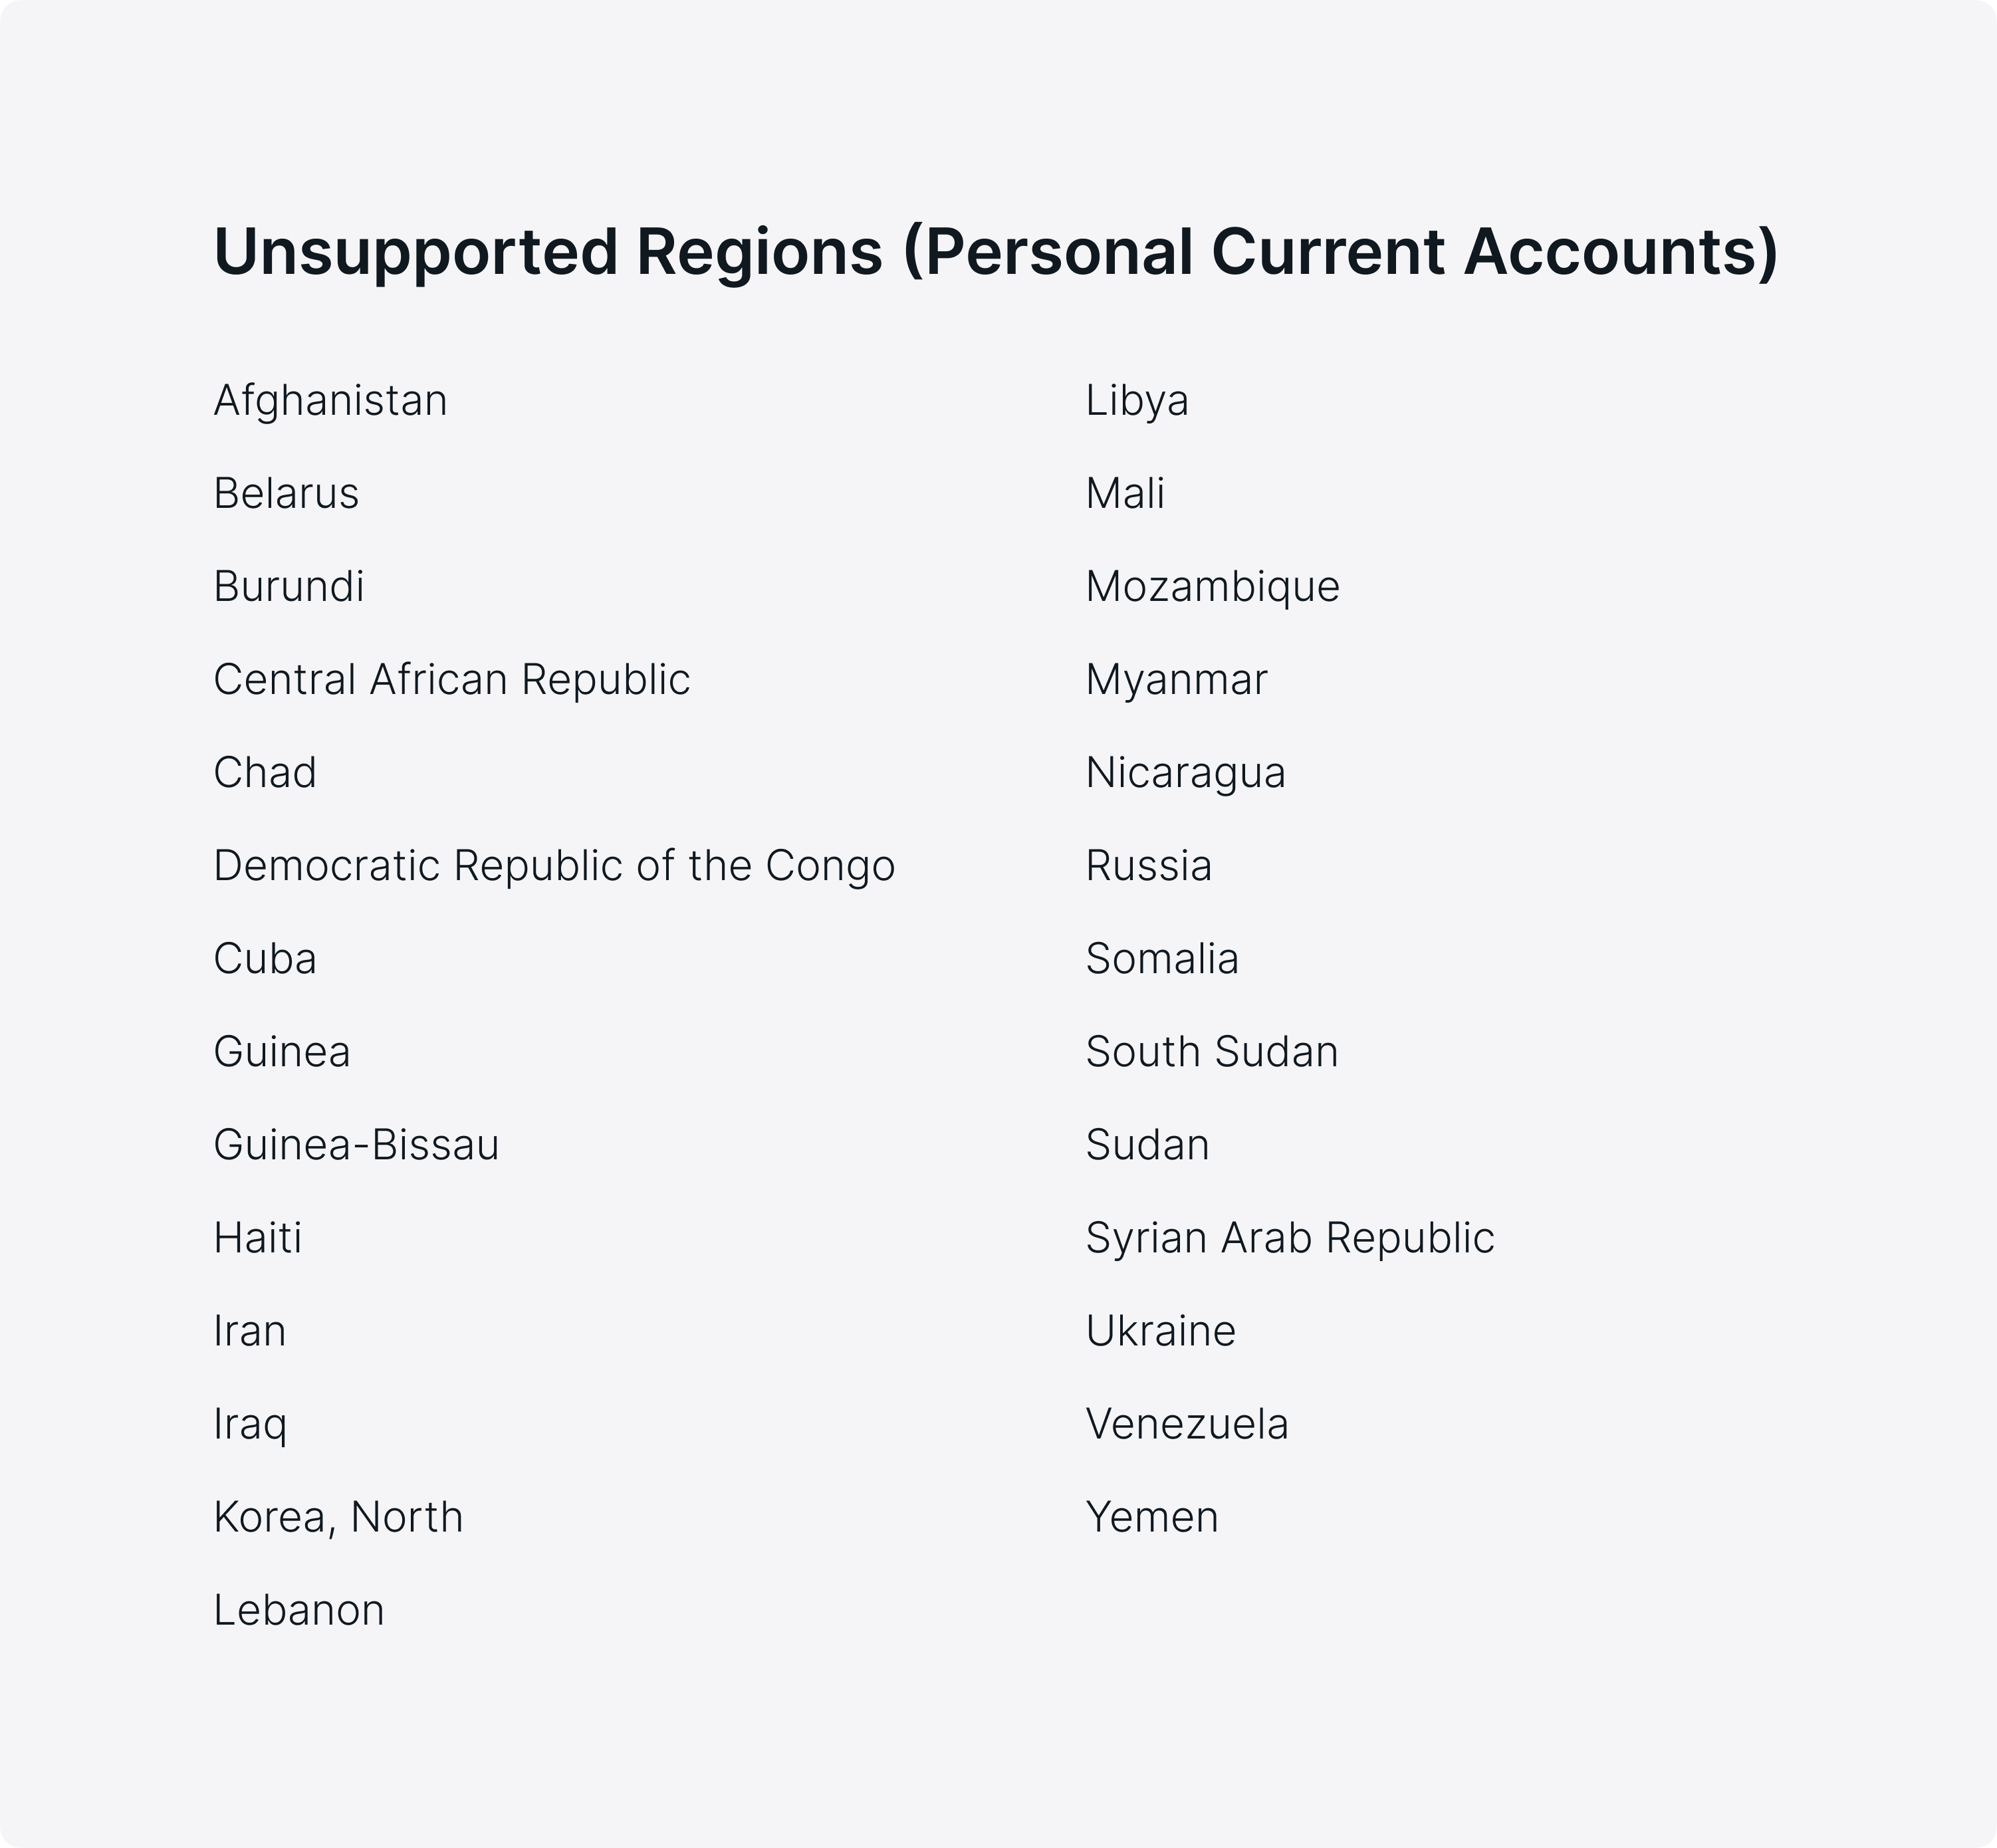 Unsupported Regions.png